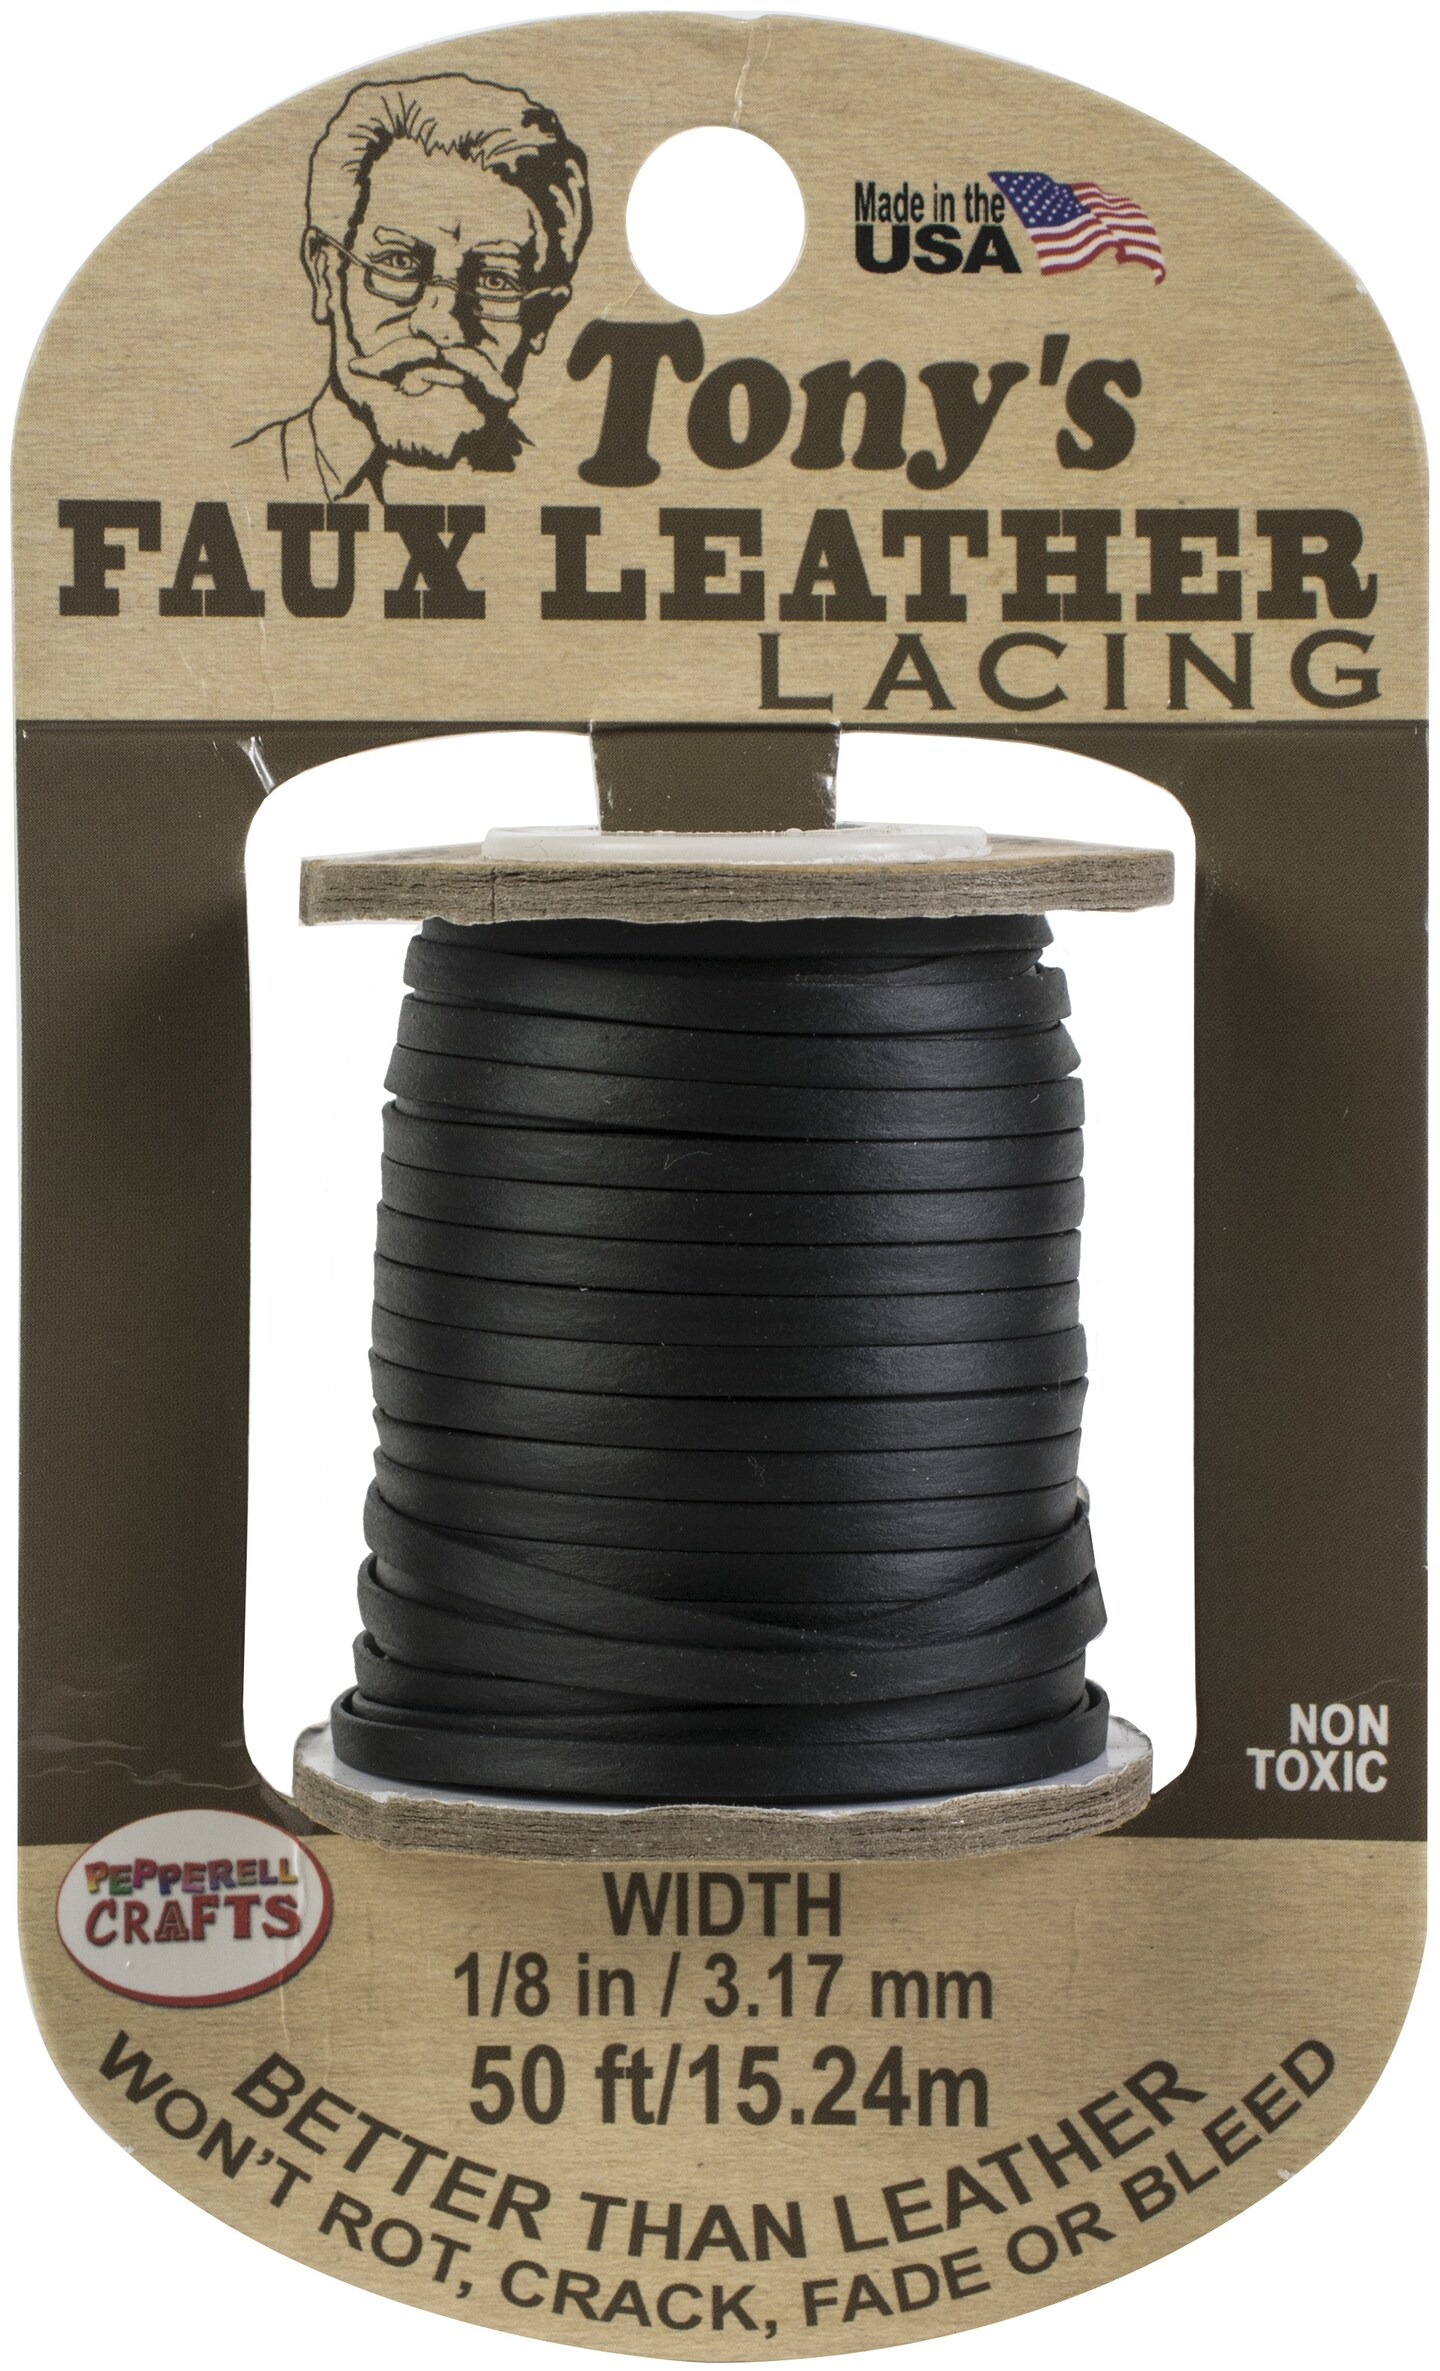 Pepperell Crafts Tony's Faux Leather Lacing 1/8X50ft